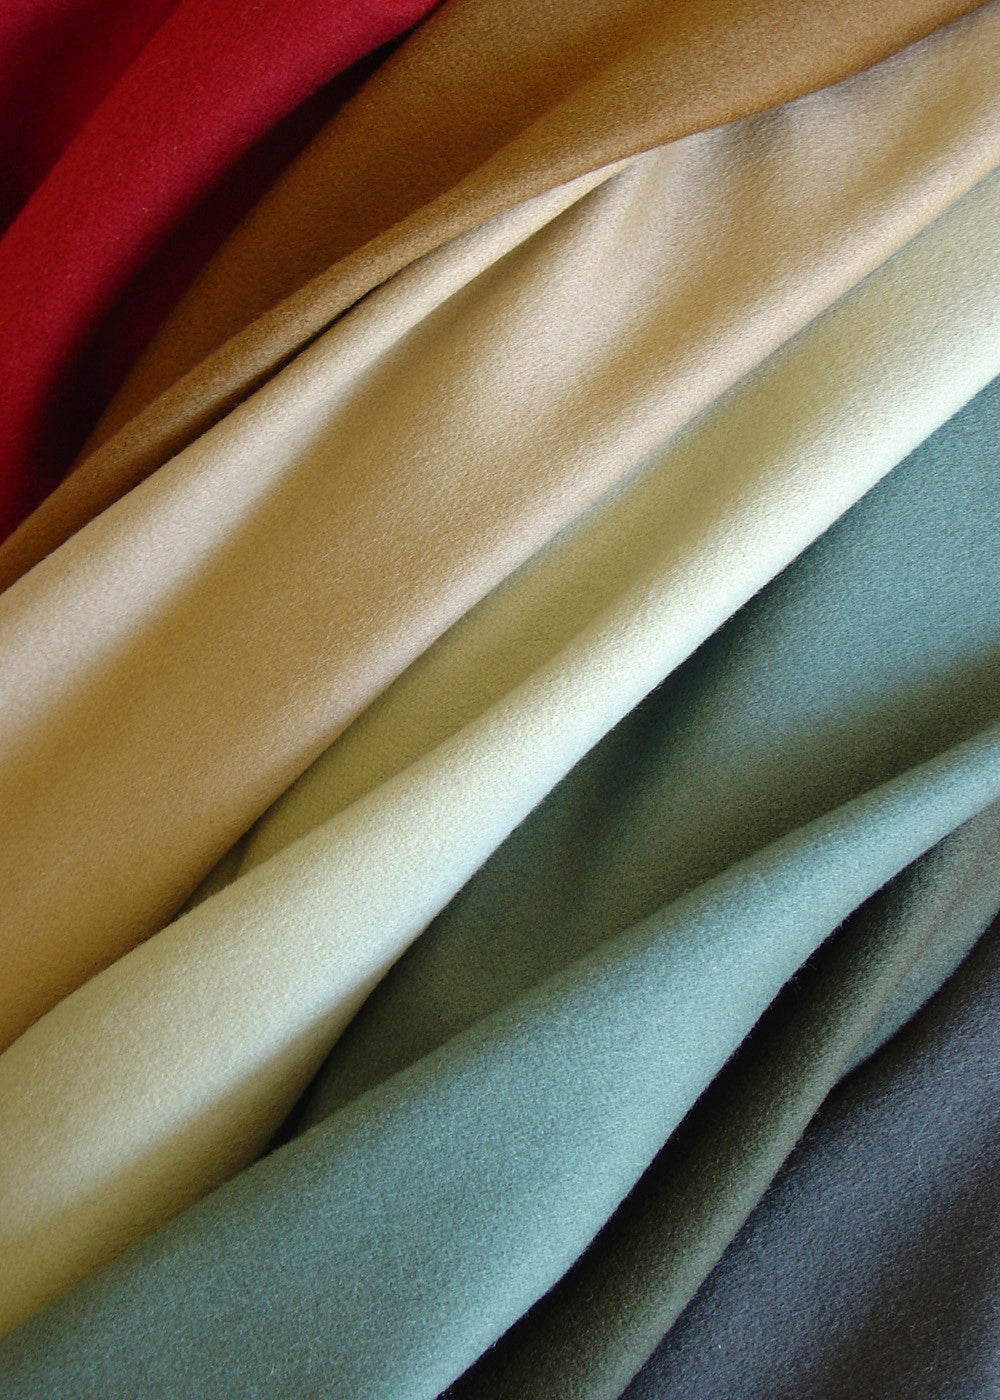 draped cashmere wool fabric for upholstery in several colors